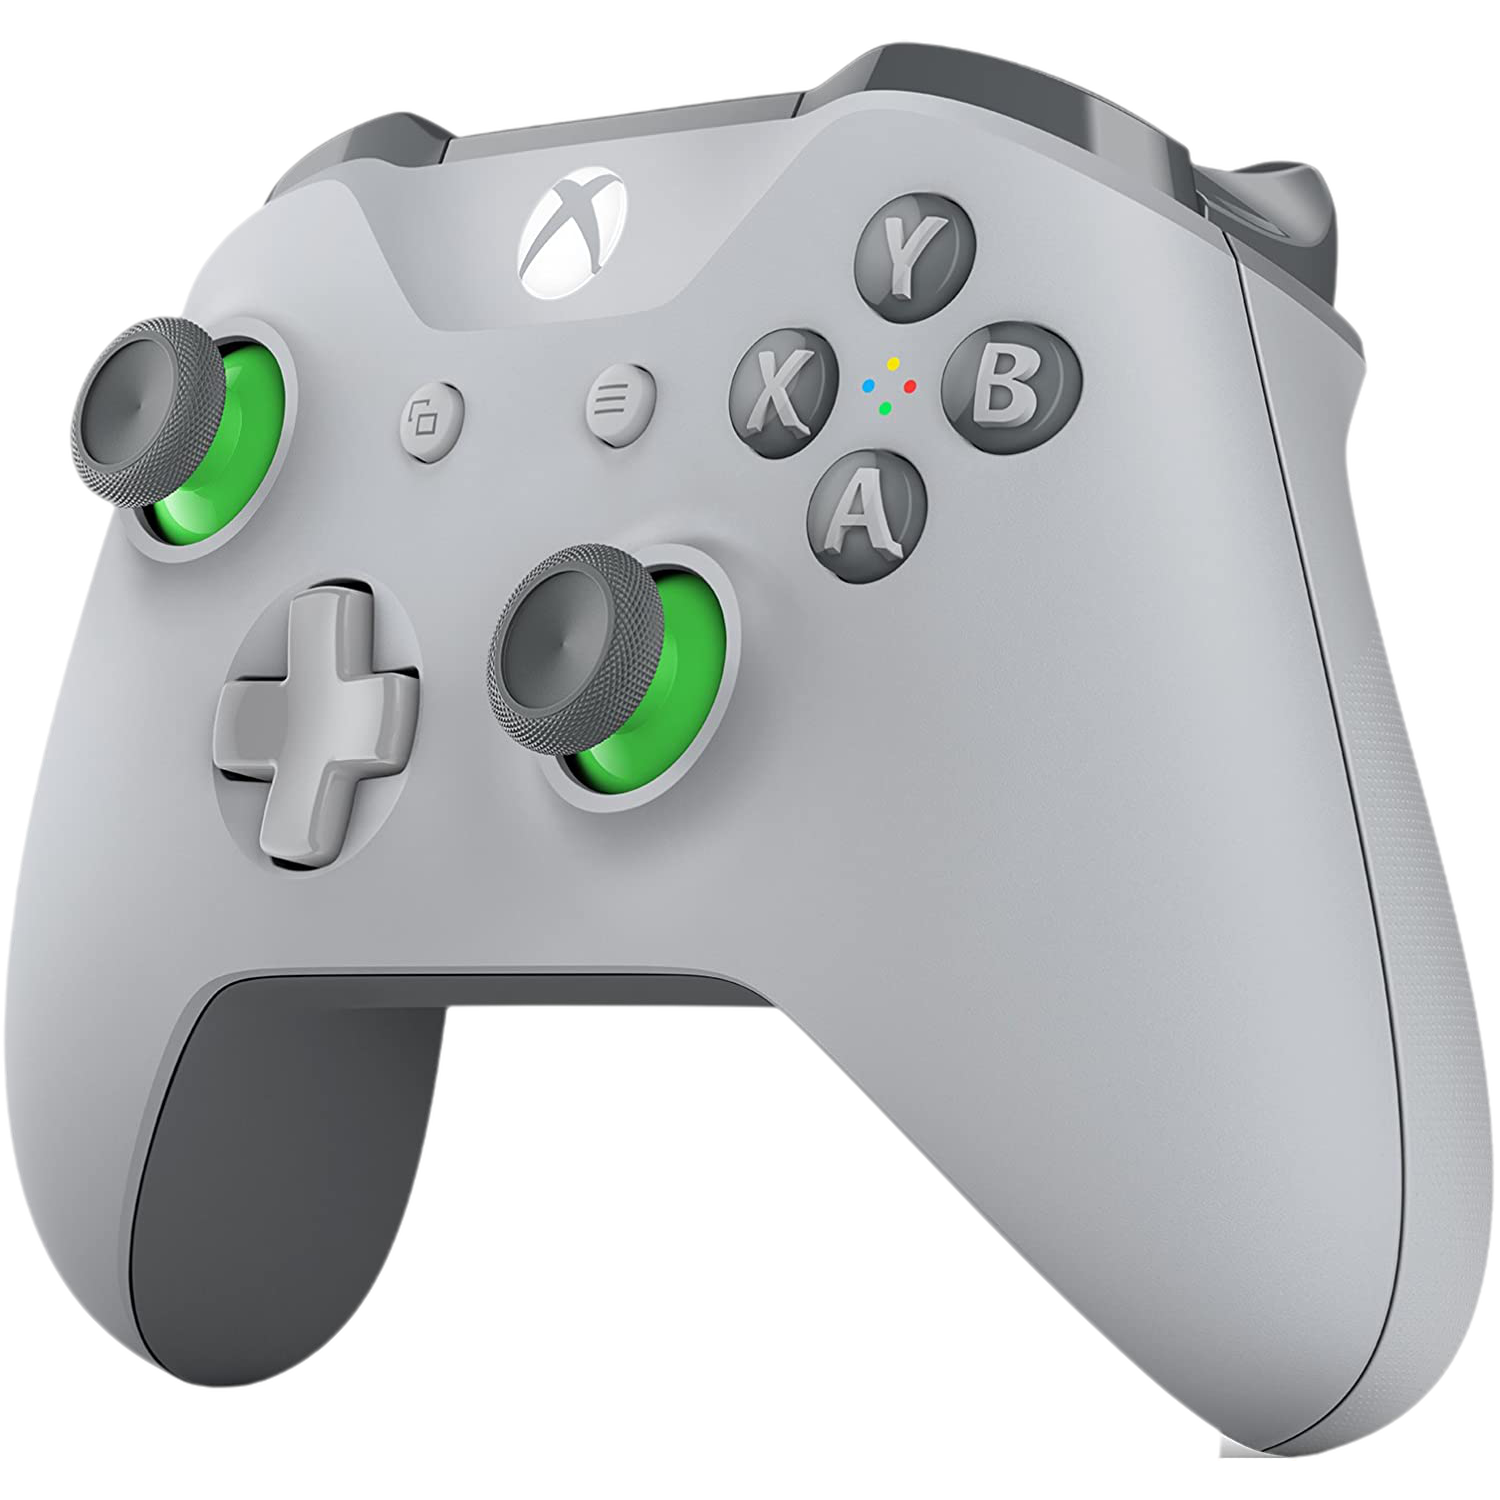 Microsoft-Official-Xbox-Controller-GreyGreen-Special-Edition-12-Months-Warranty-2